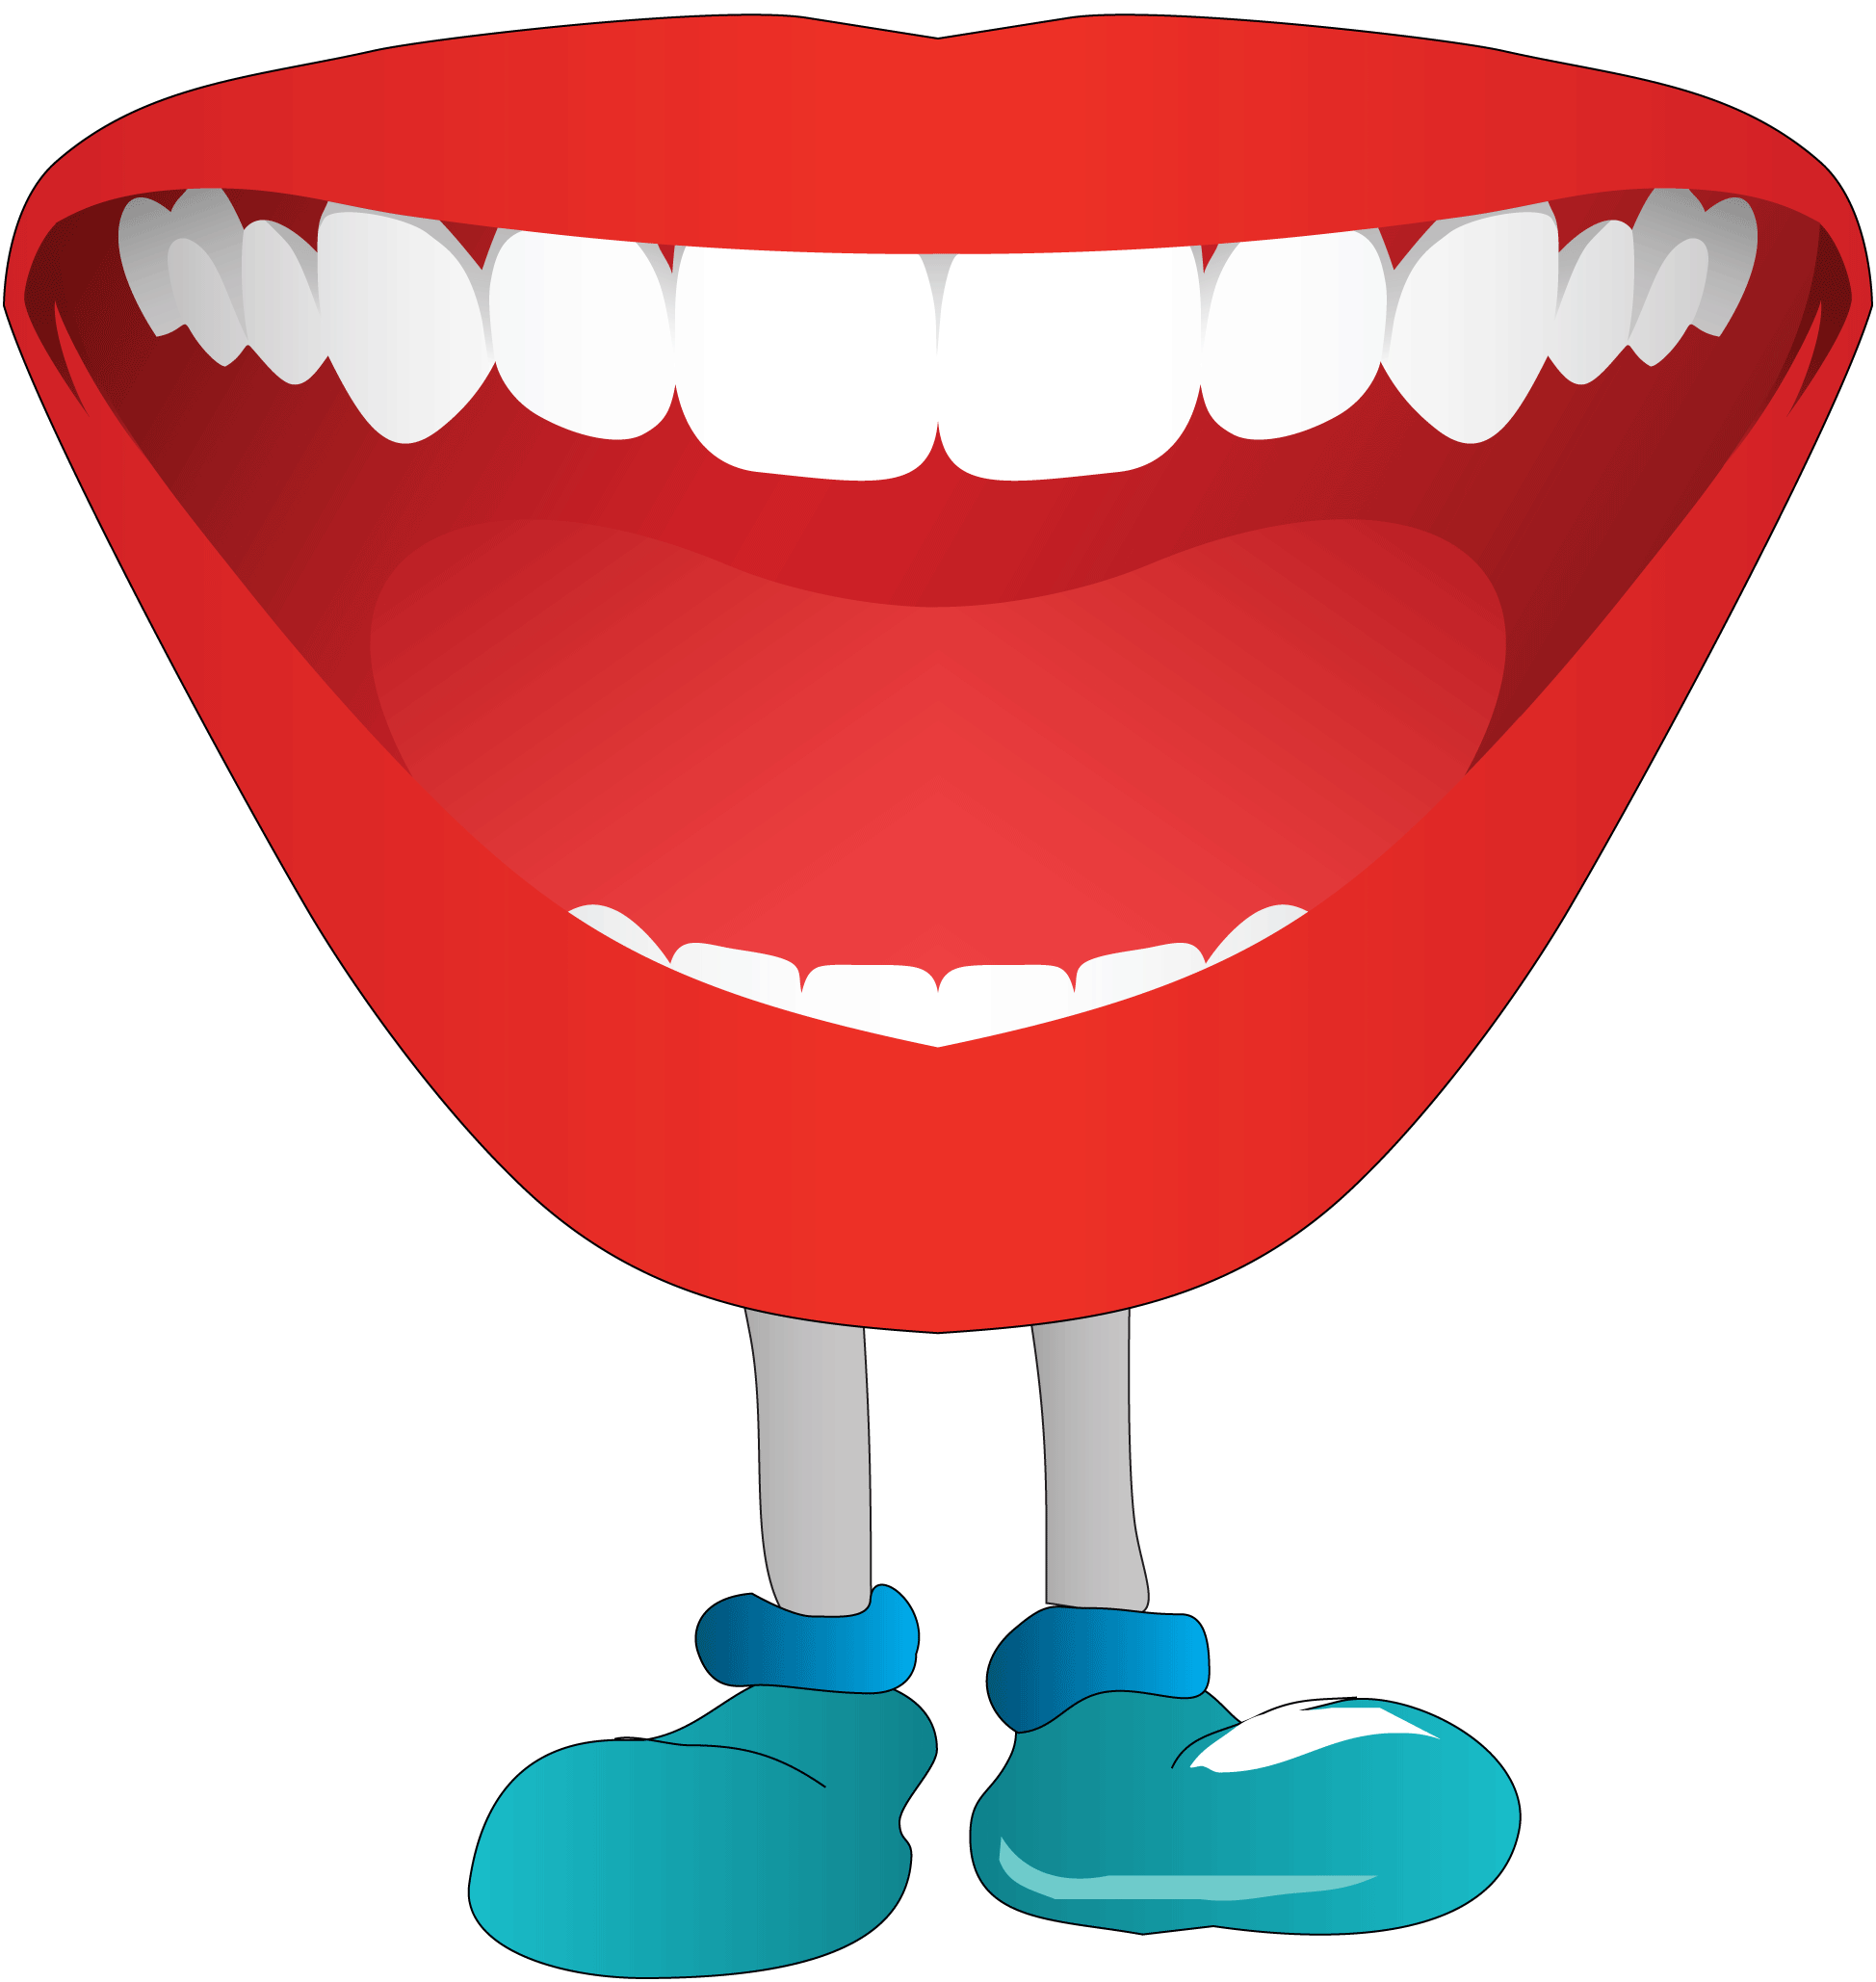 Clipart red open mouth